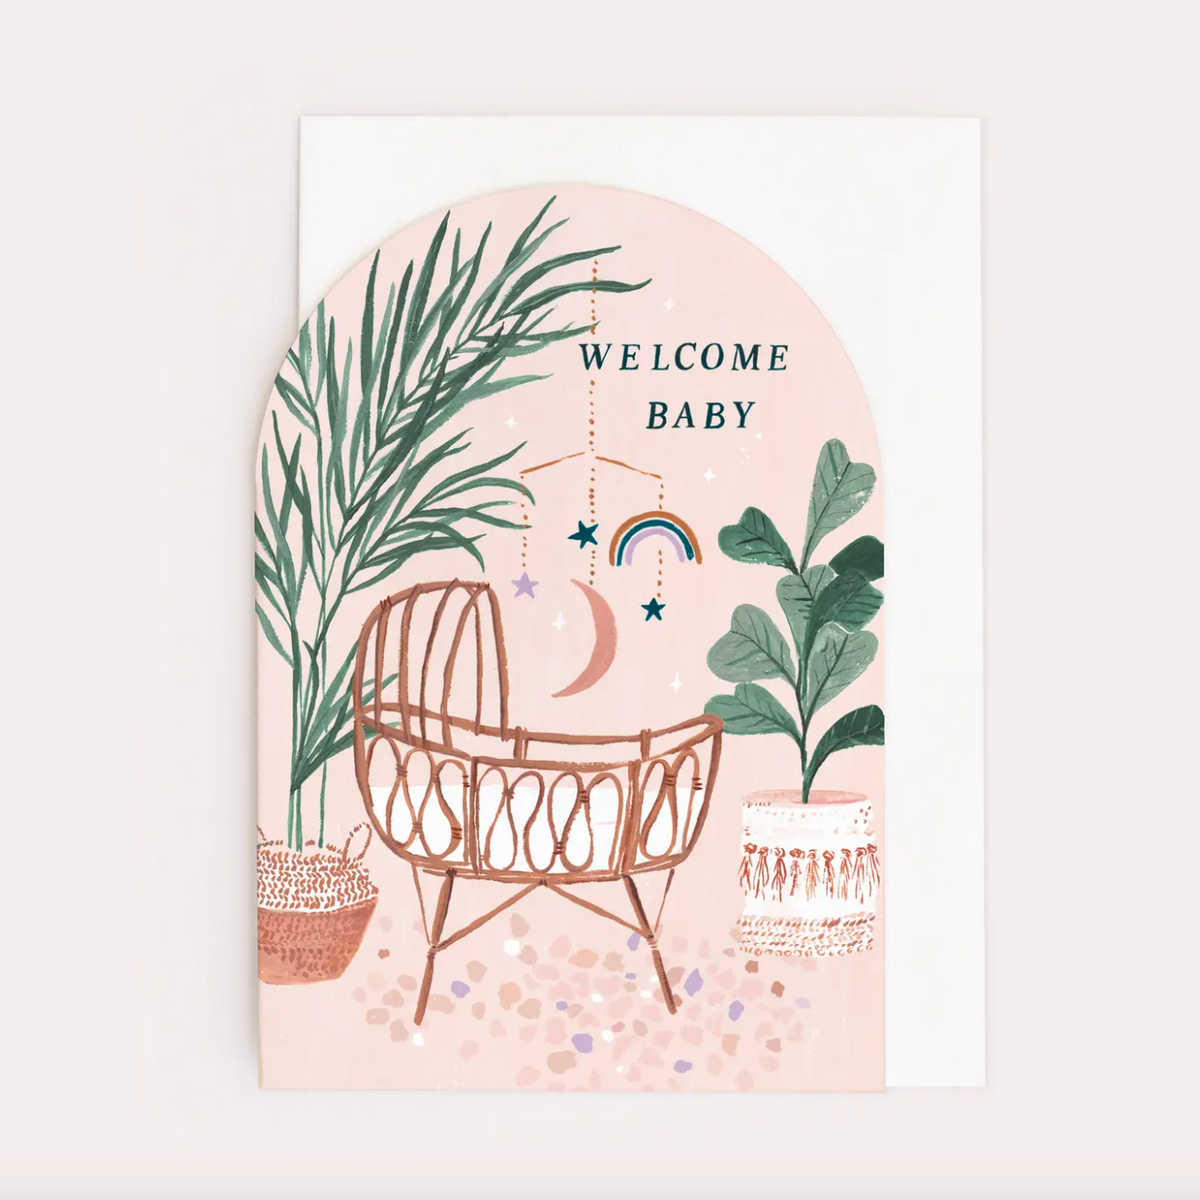 Sister Paper Cards - Assorted Styles